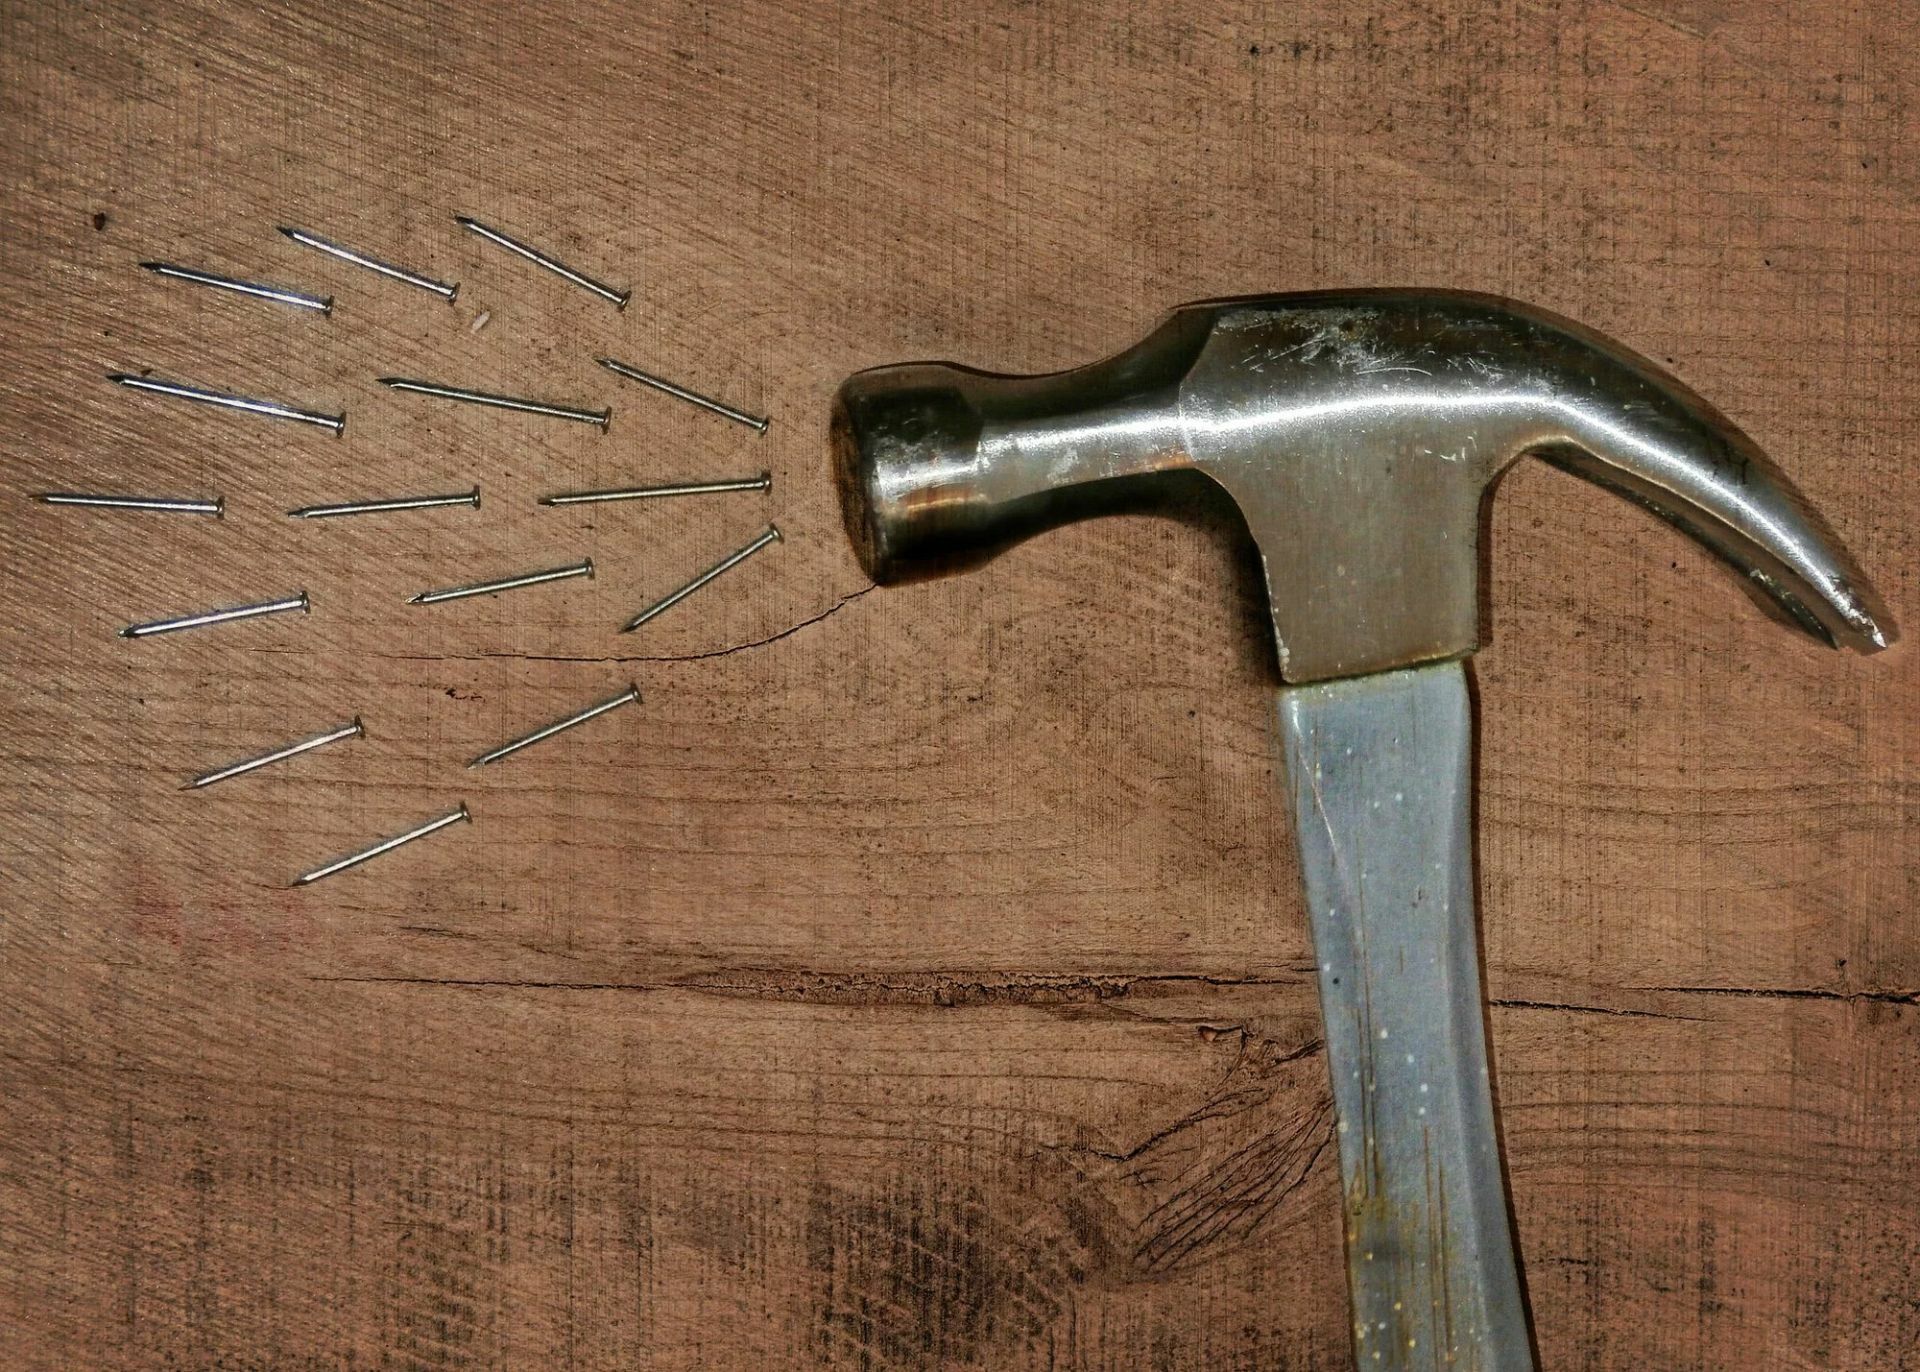 hammer and nails on wood board